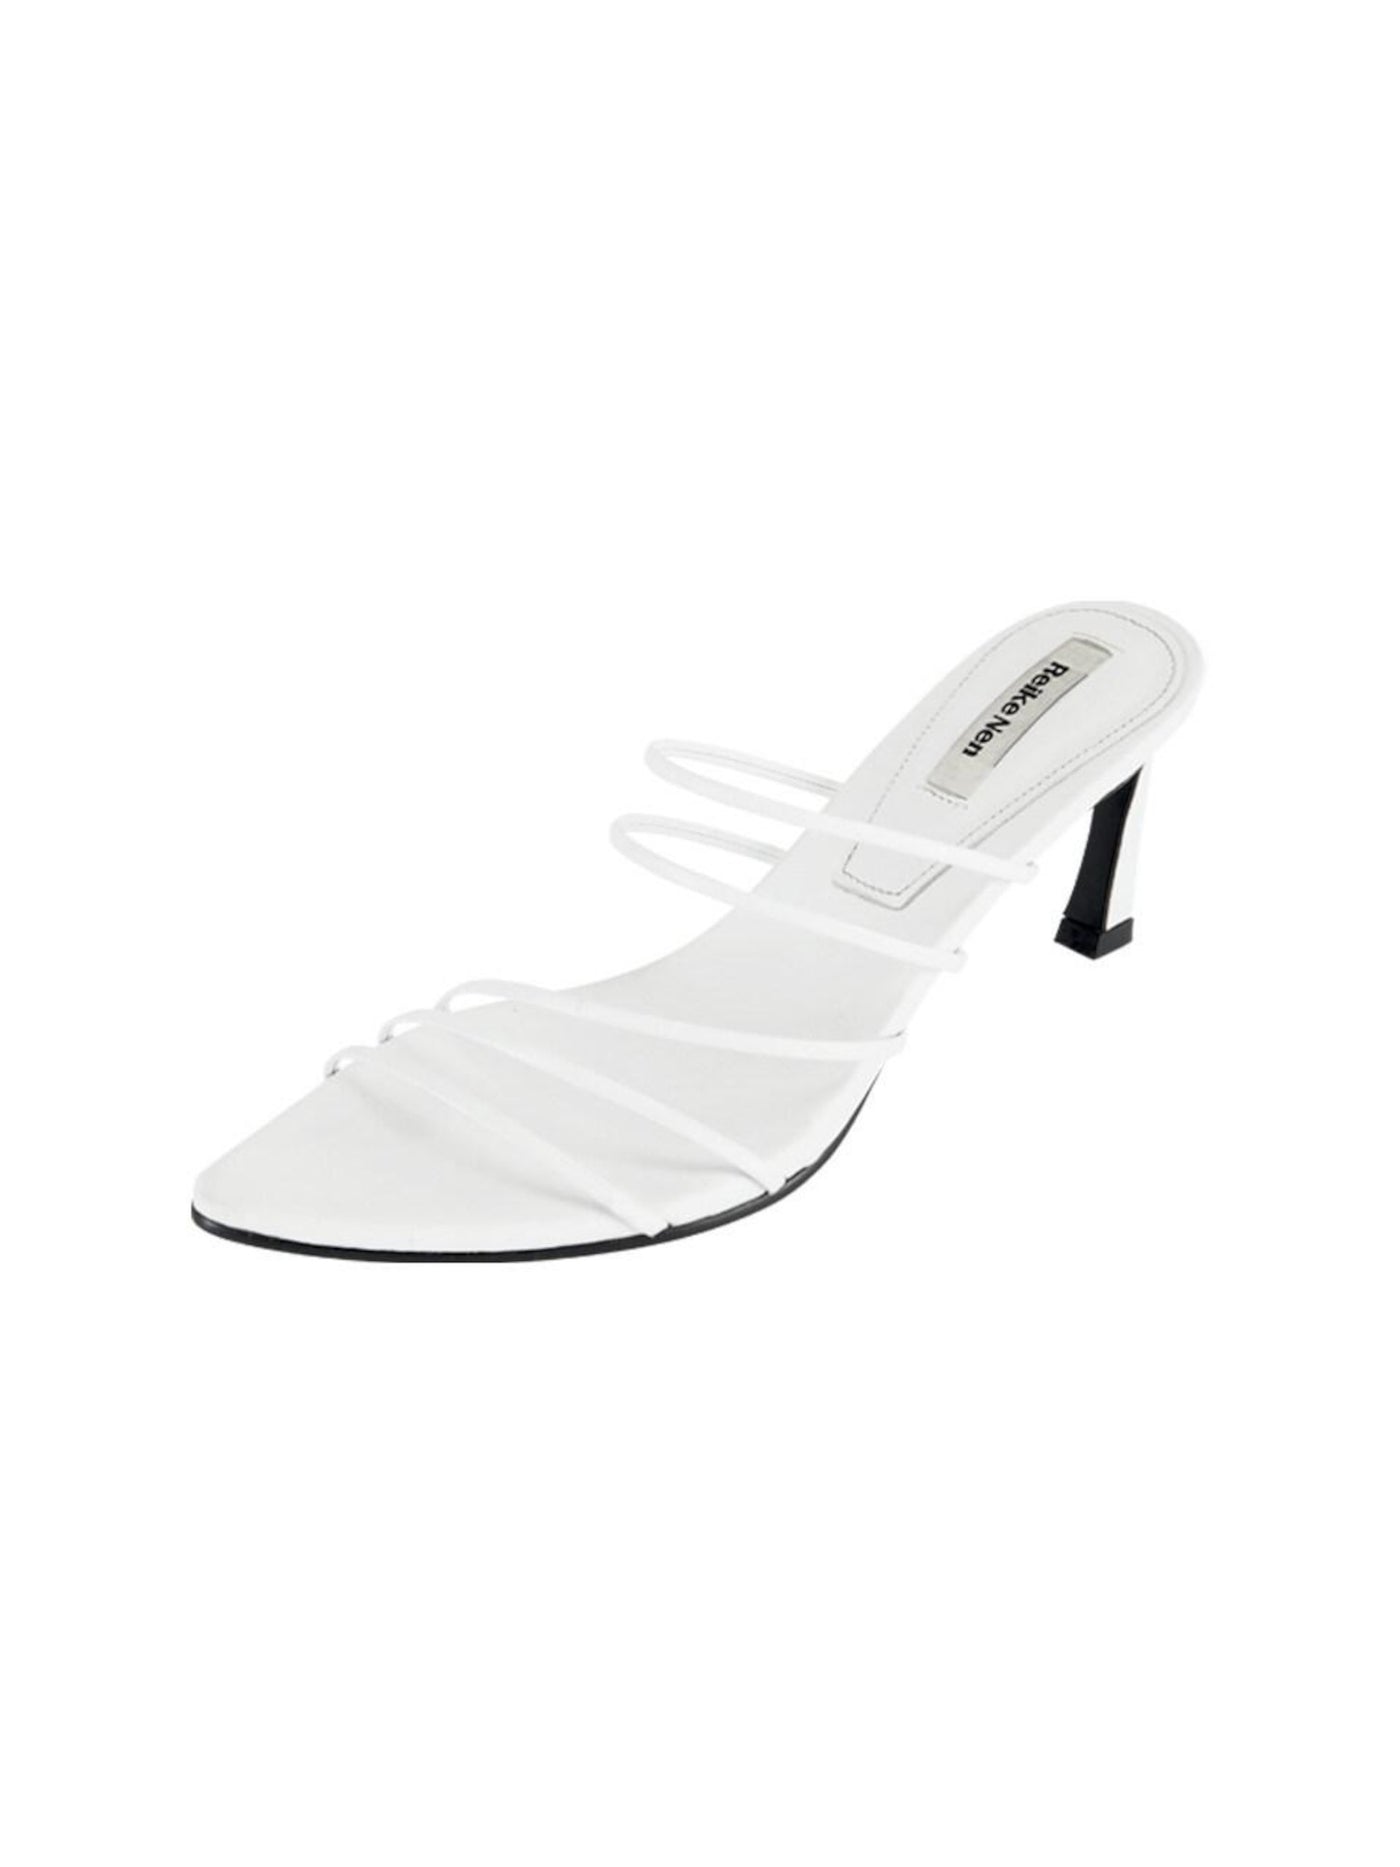 REIKE NEN Womens White Strappy Padded Pointed Toe Sculpted Heel Slip On Leather Dress Slide Sandals Shoes 36.5